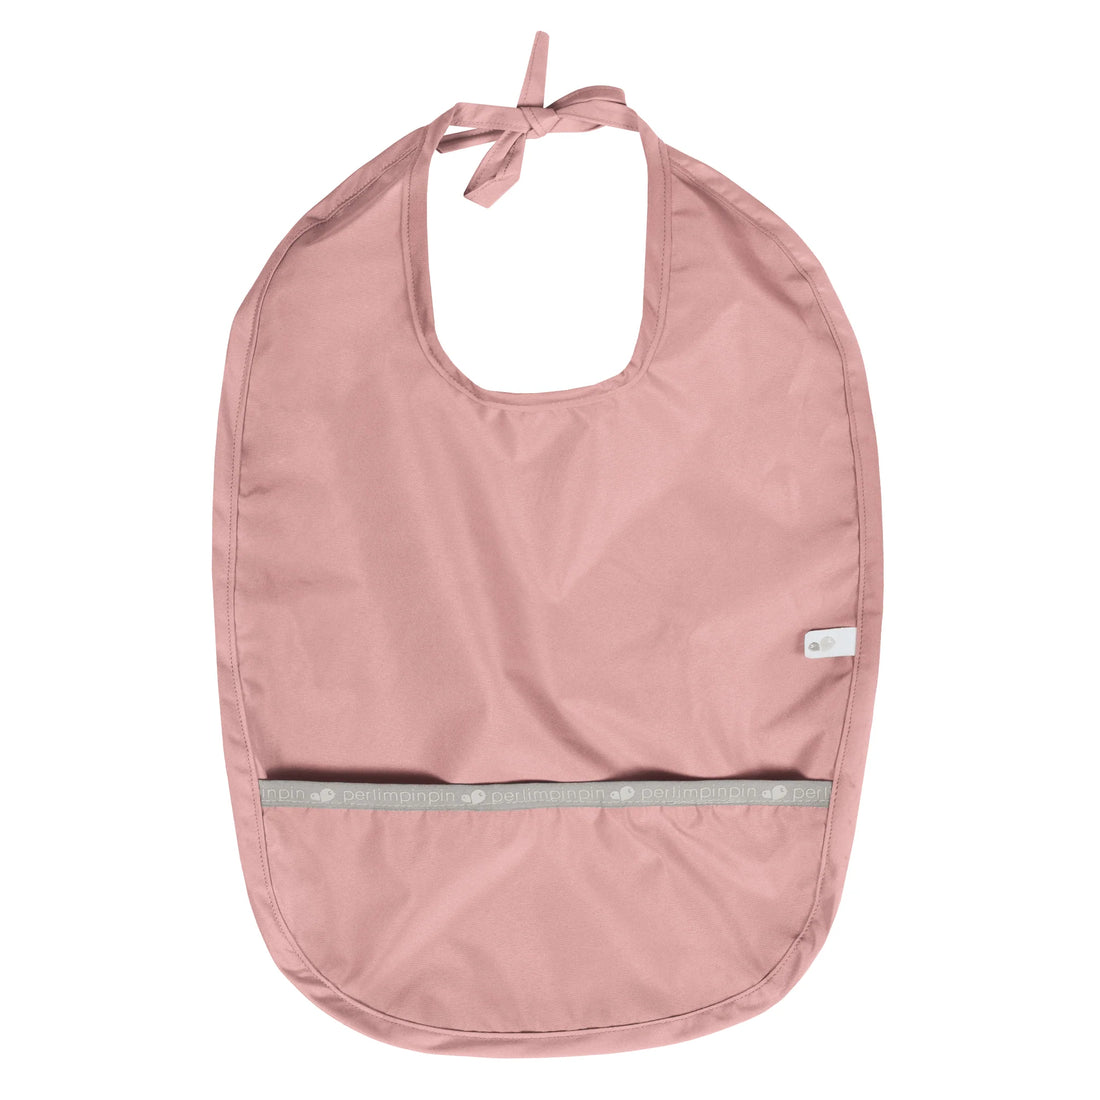 Omaiki Gusto Bib with sleeves 6 to 36 months